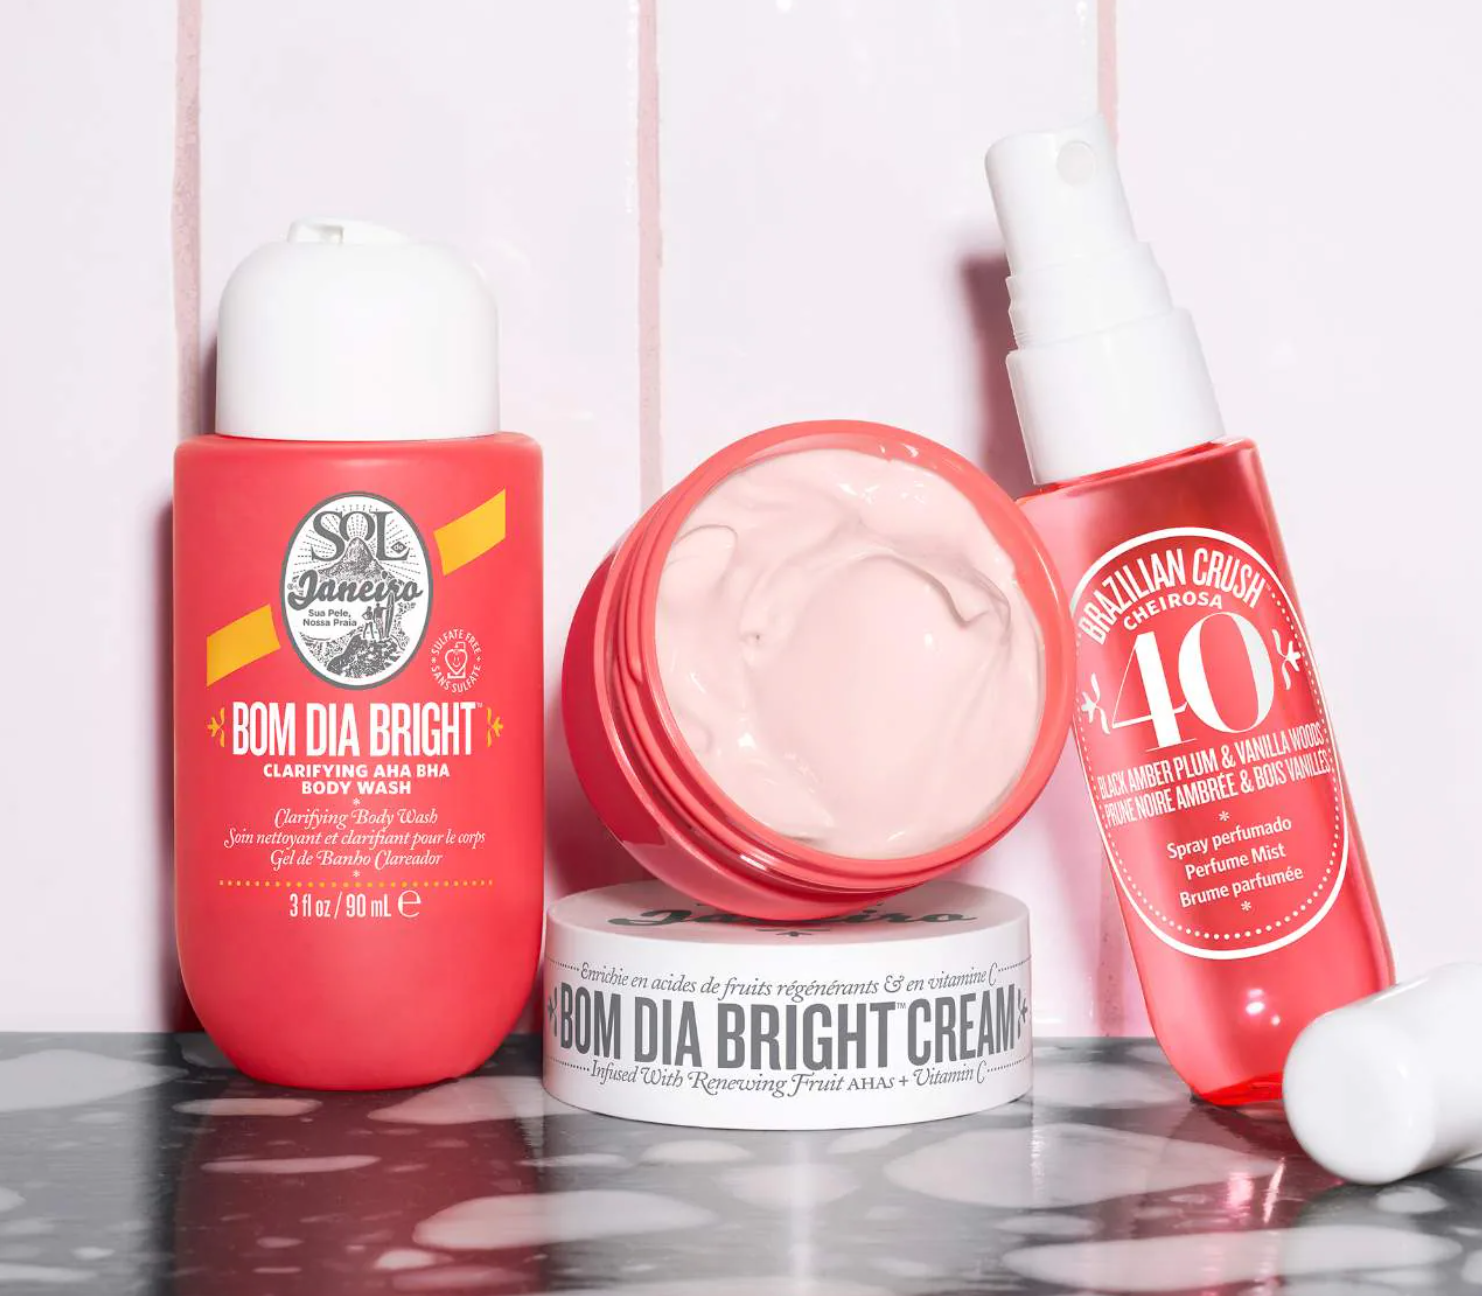 The Best Valentine's Day Beauty Gifts